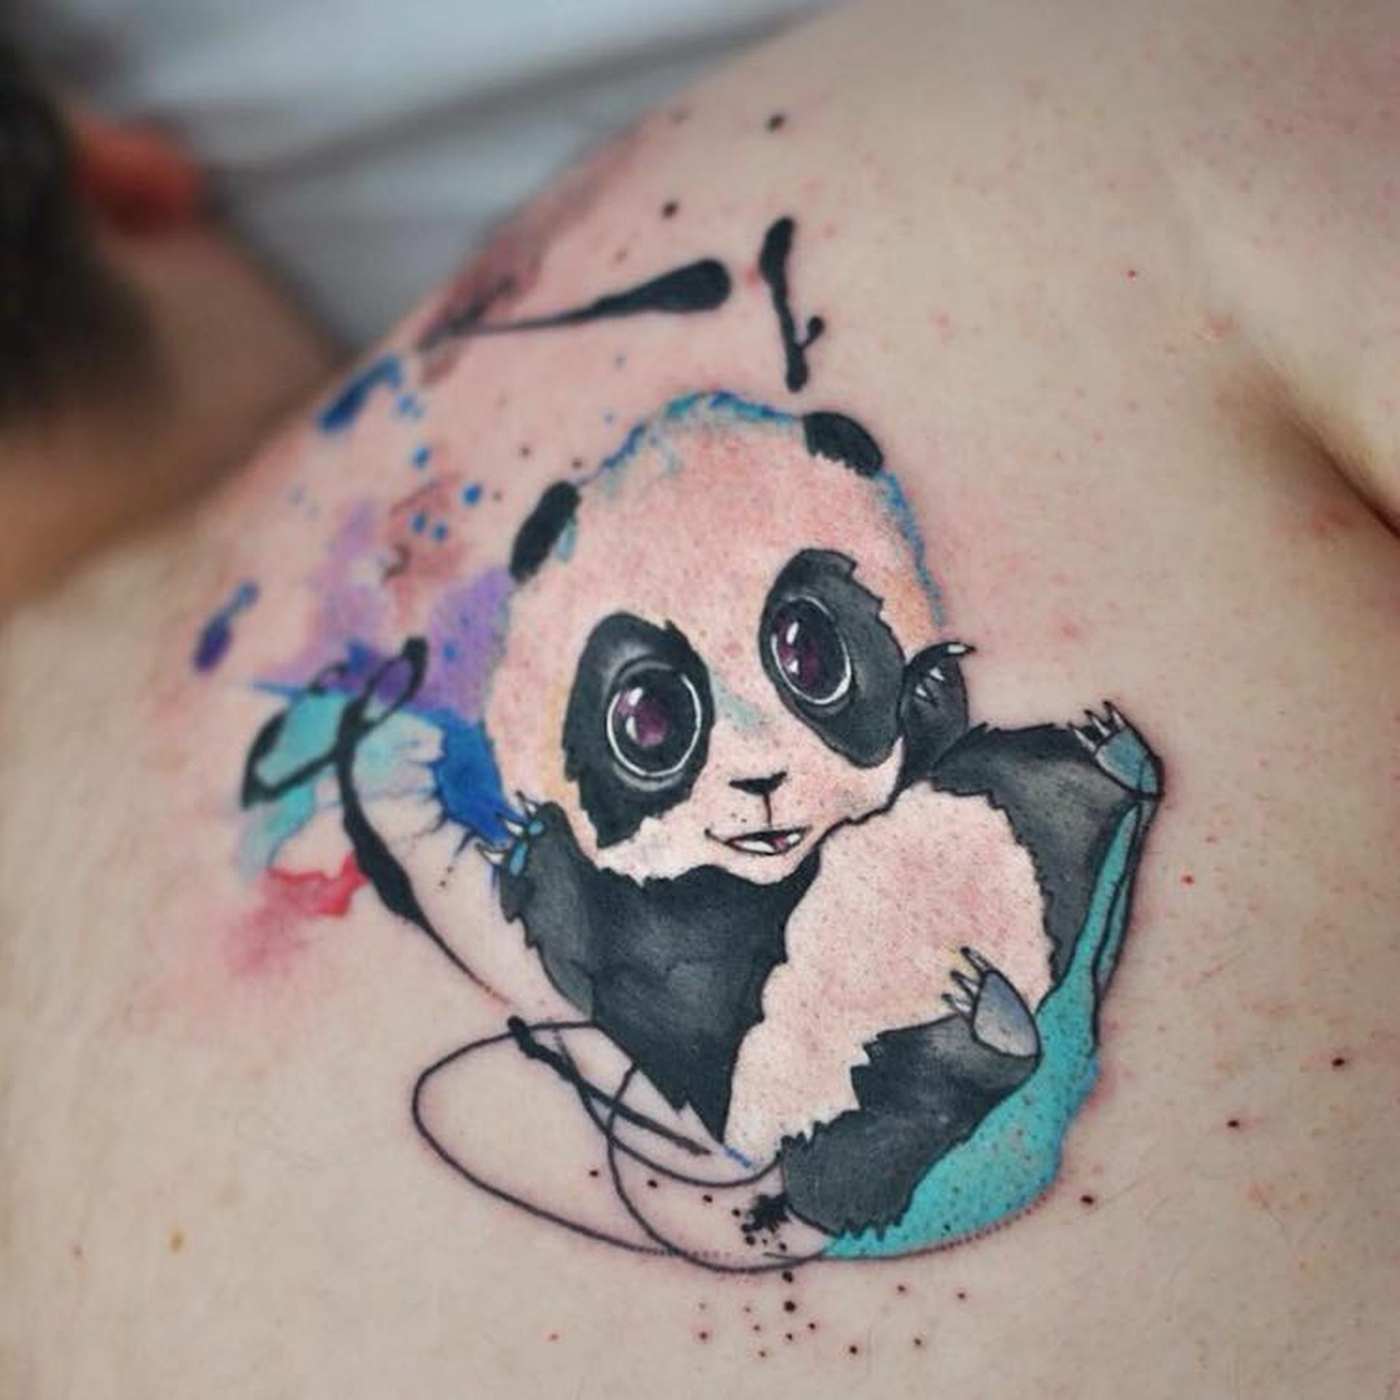 Lower Panda Tattoo with Comic and Watercolor effect in cold colors